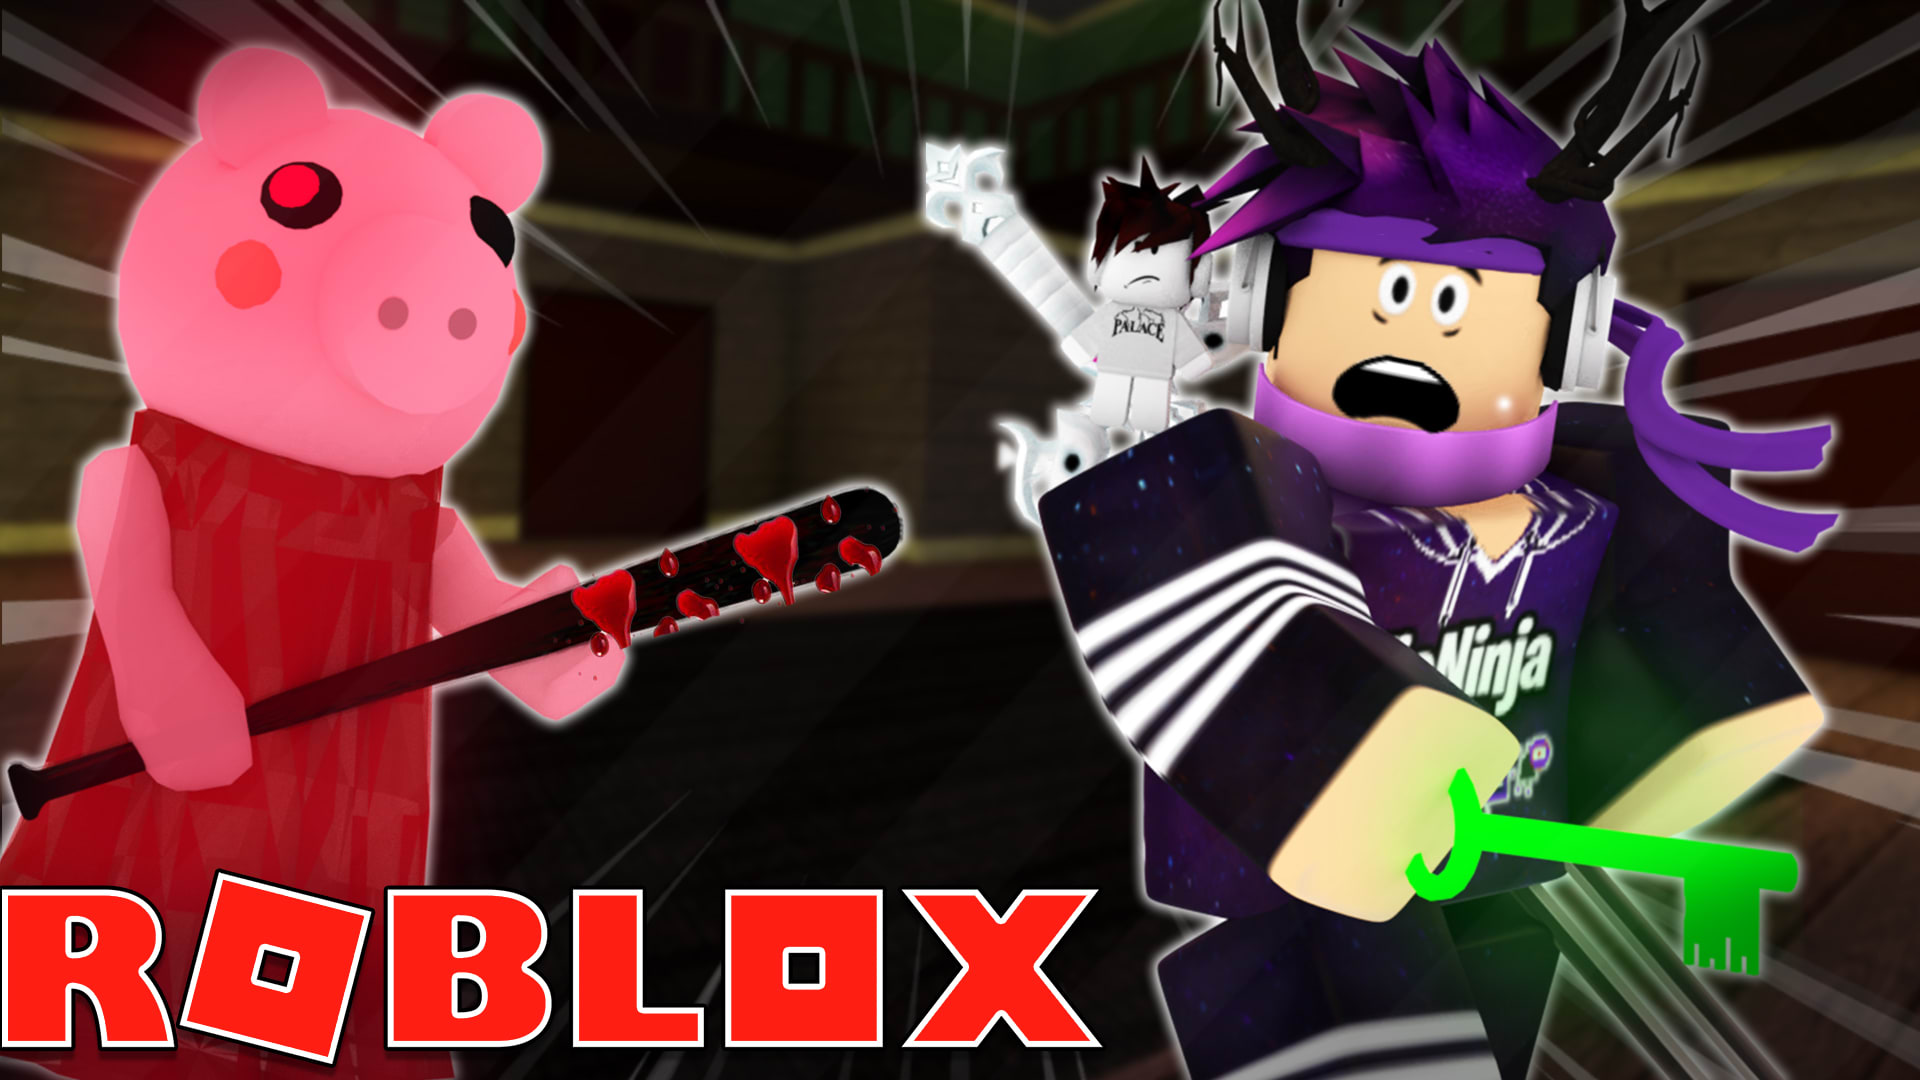 Hd Roblox - create a professional roblox gfx for your group or game